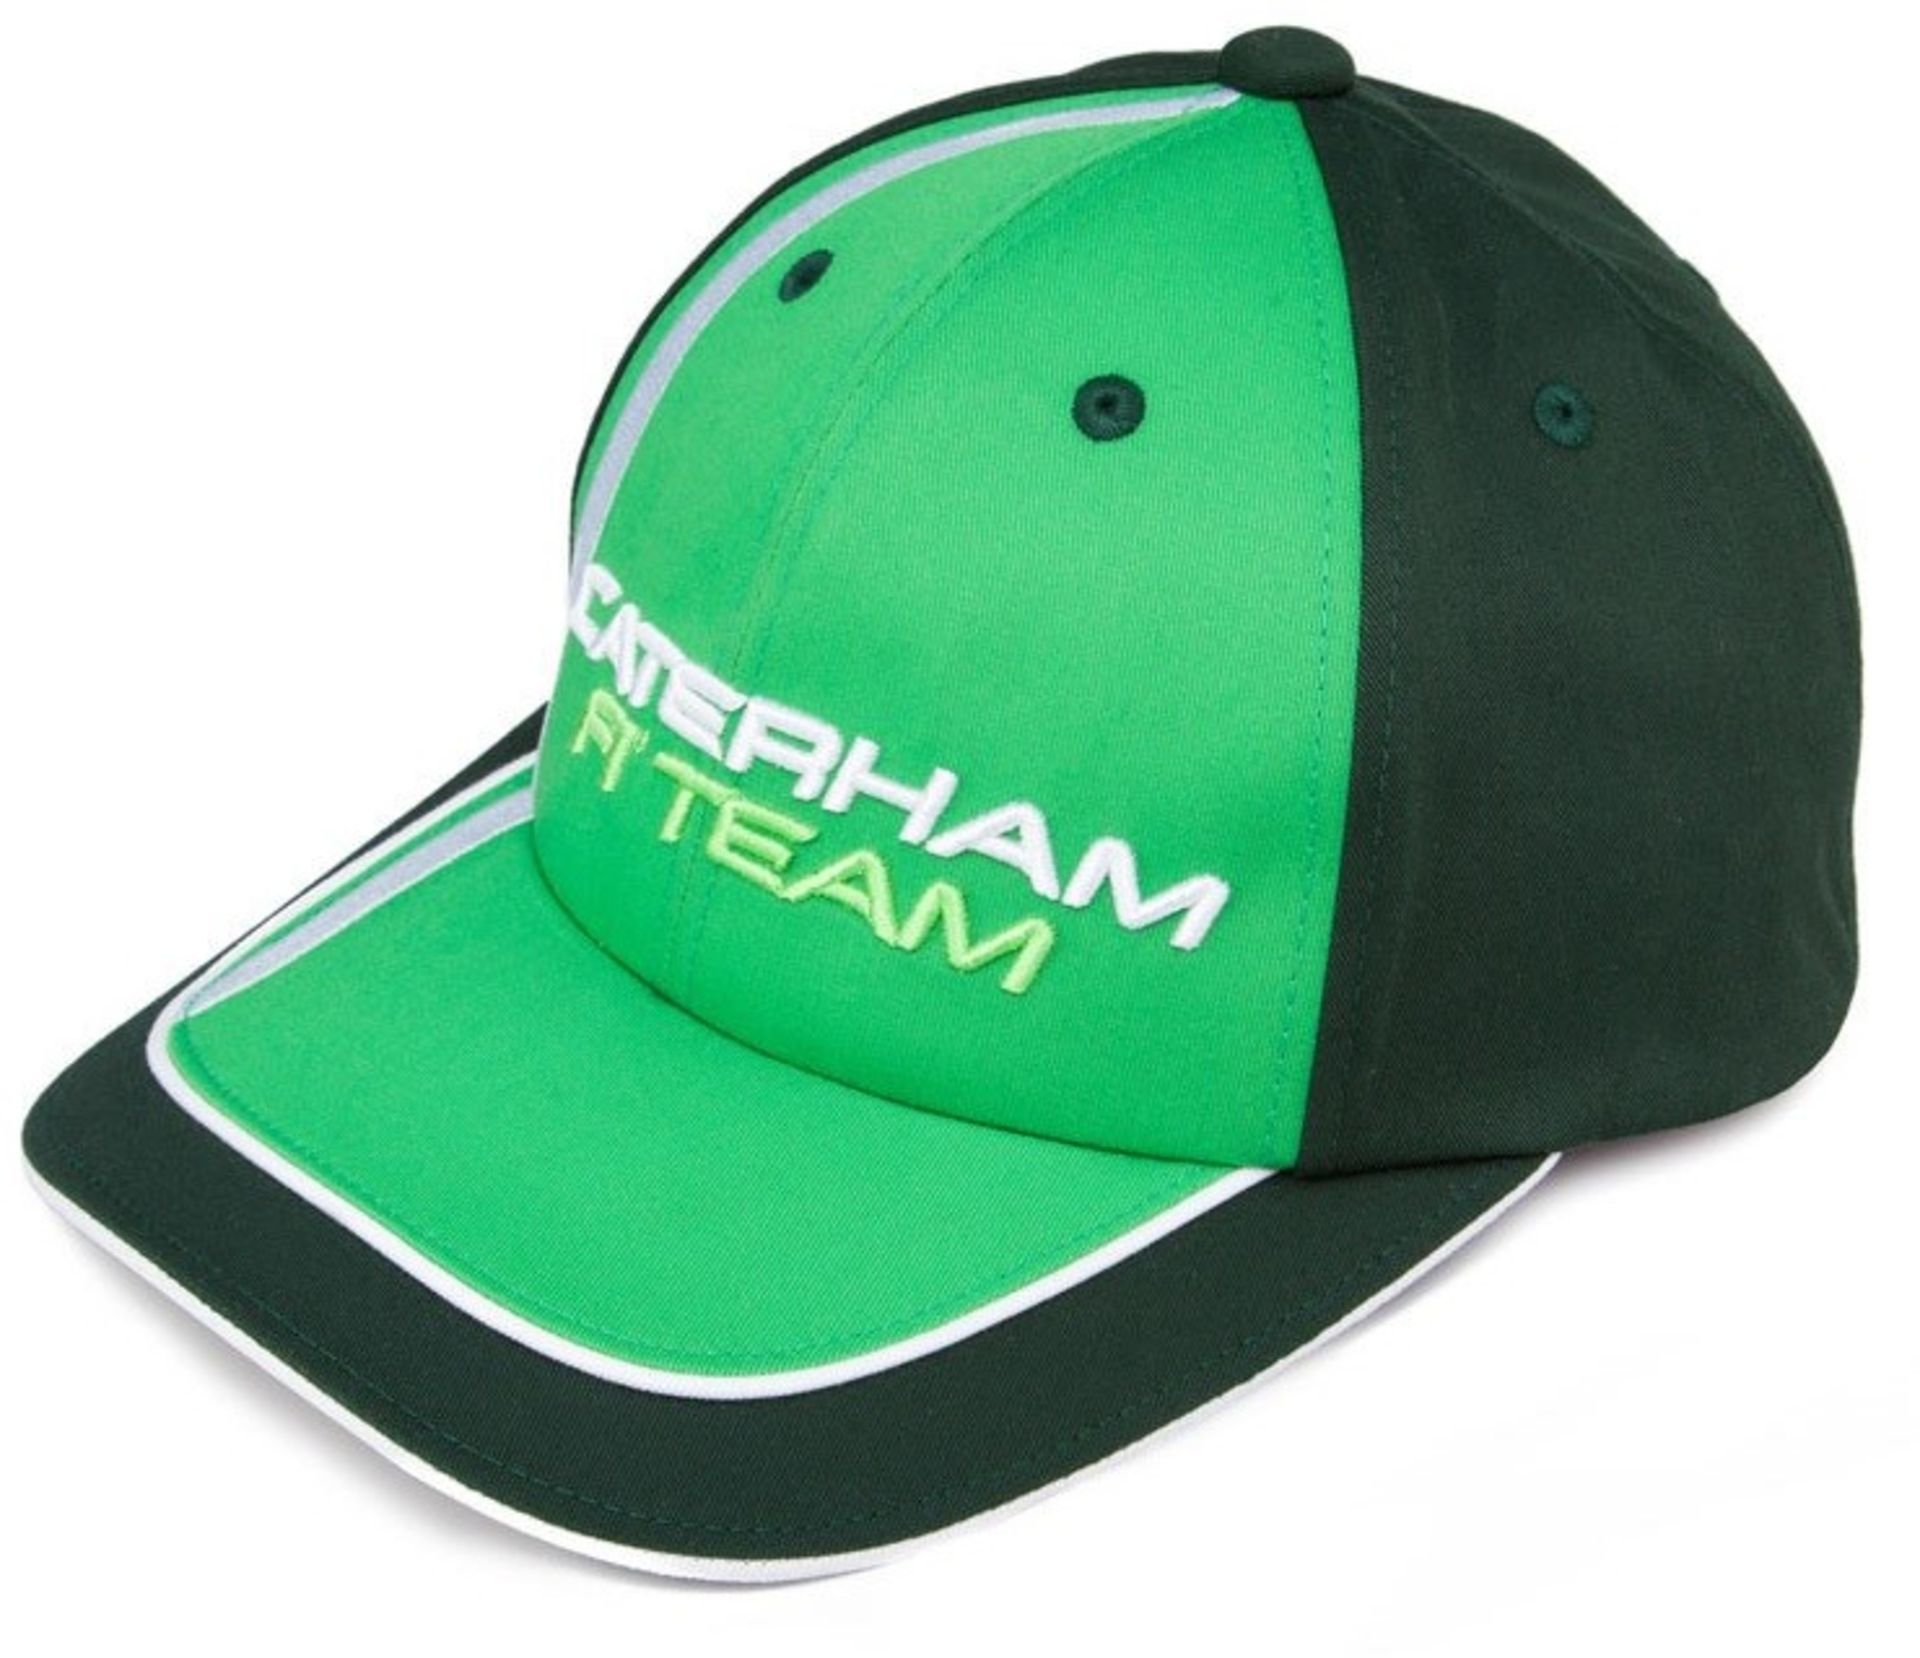 12 x CATERHAM F1 Team Caps - CL155 - Ref: JIM078 - Location: Altrincham WA14 - NEW with TAGS  We - Image 4 of 6